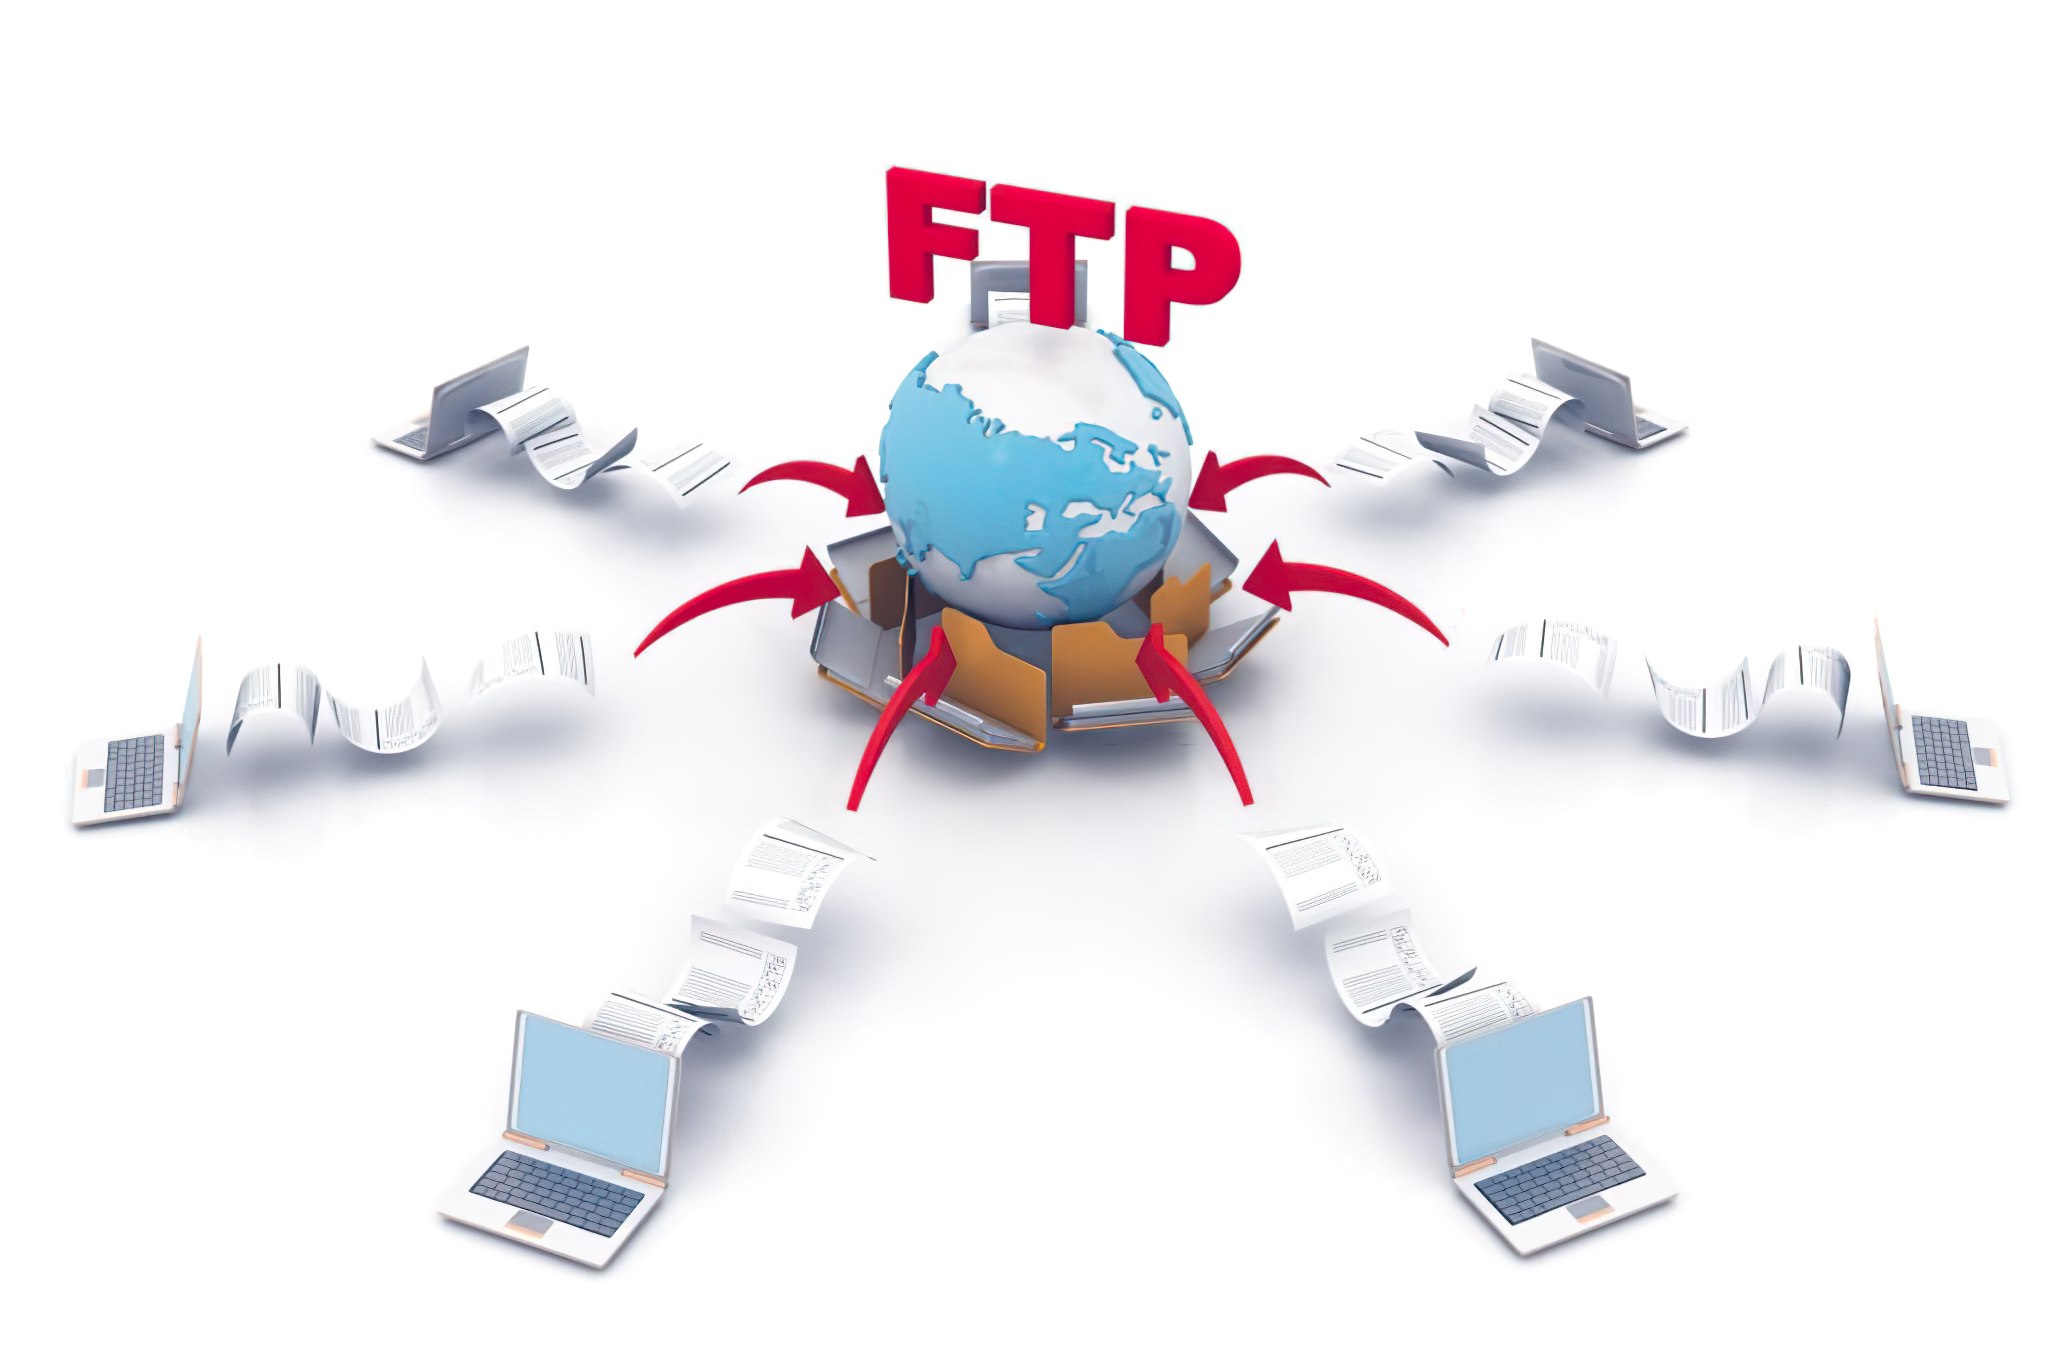 How implementations FTP Works in WordPress